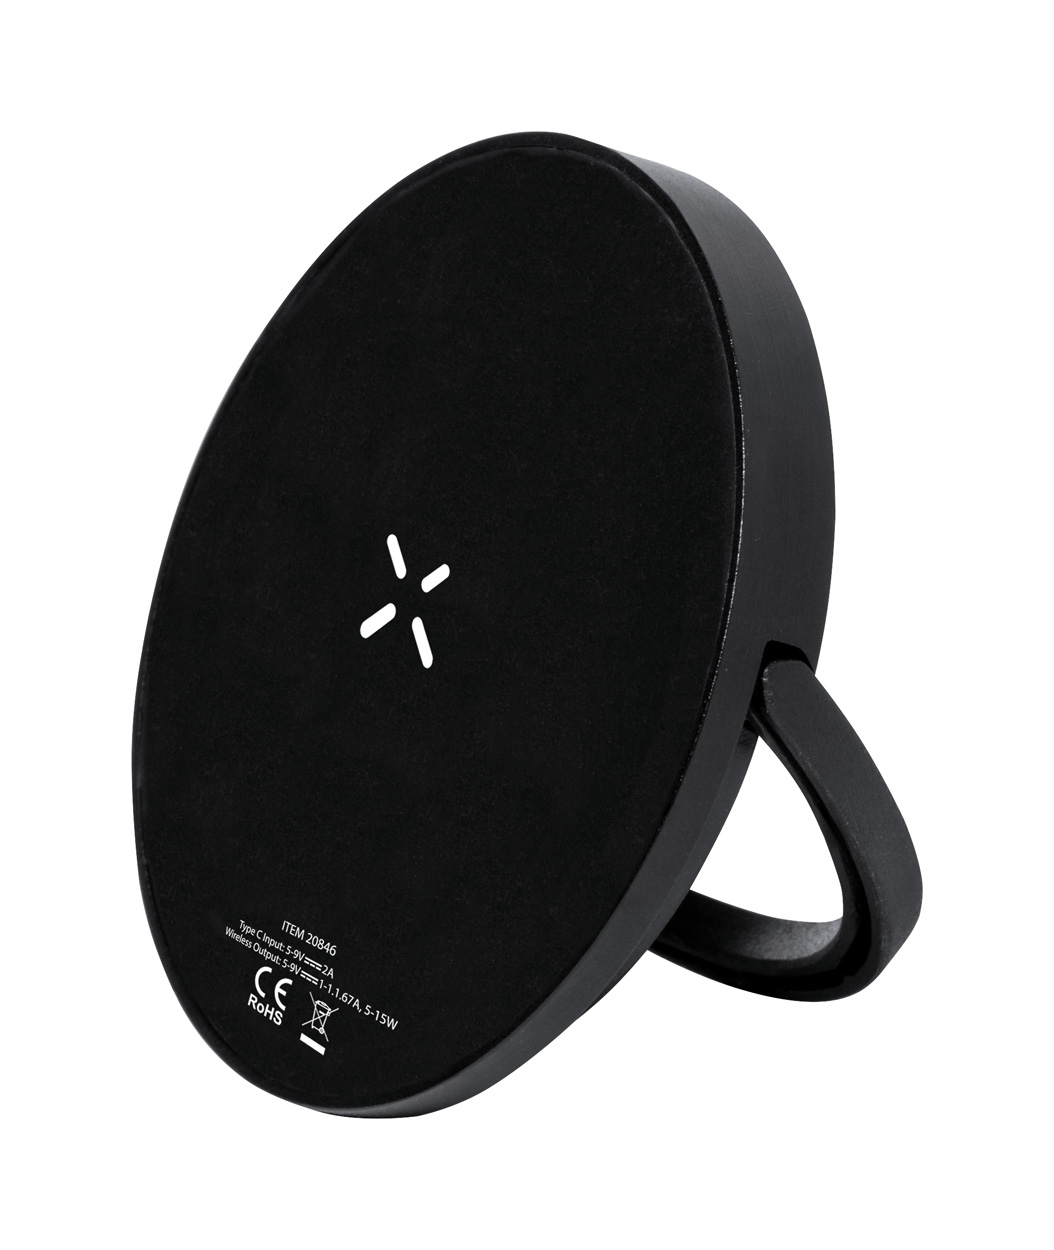 Bellmer magnetic wireless charger